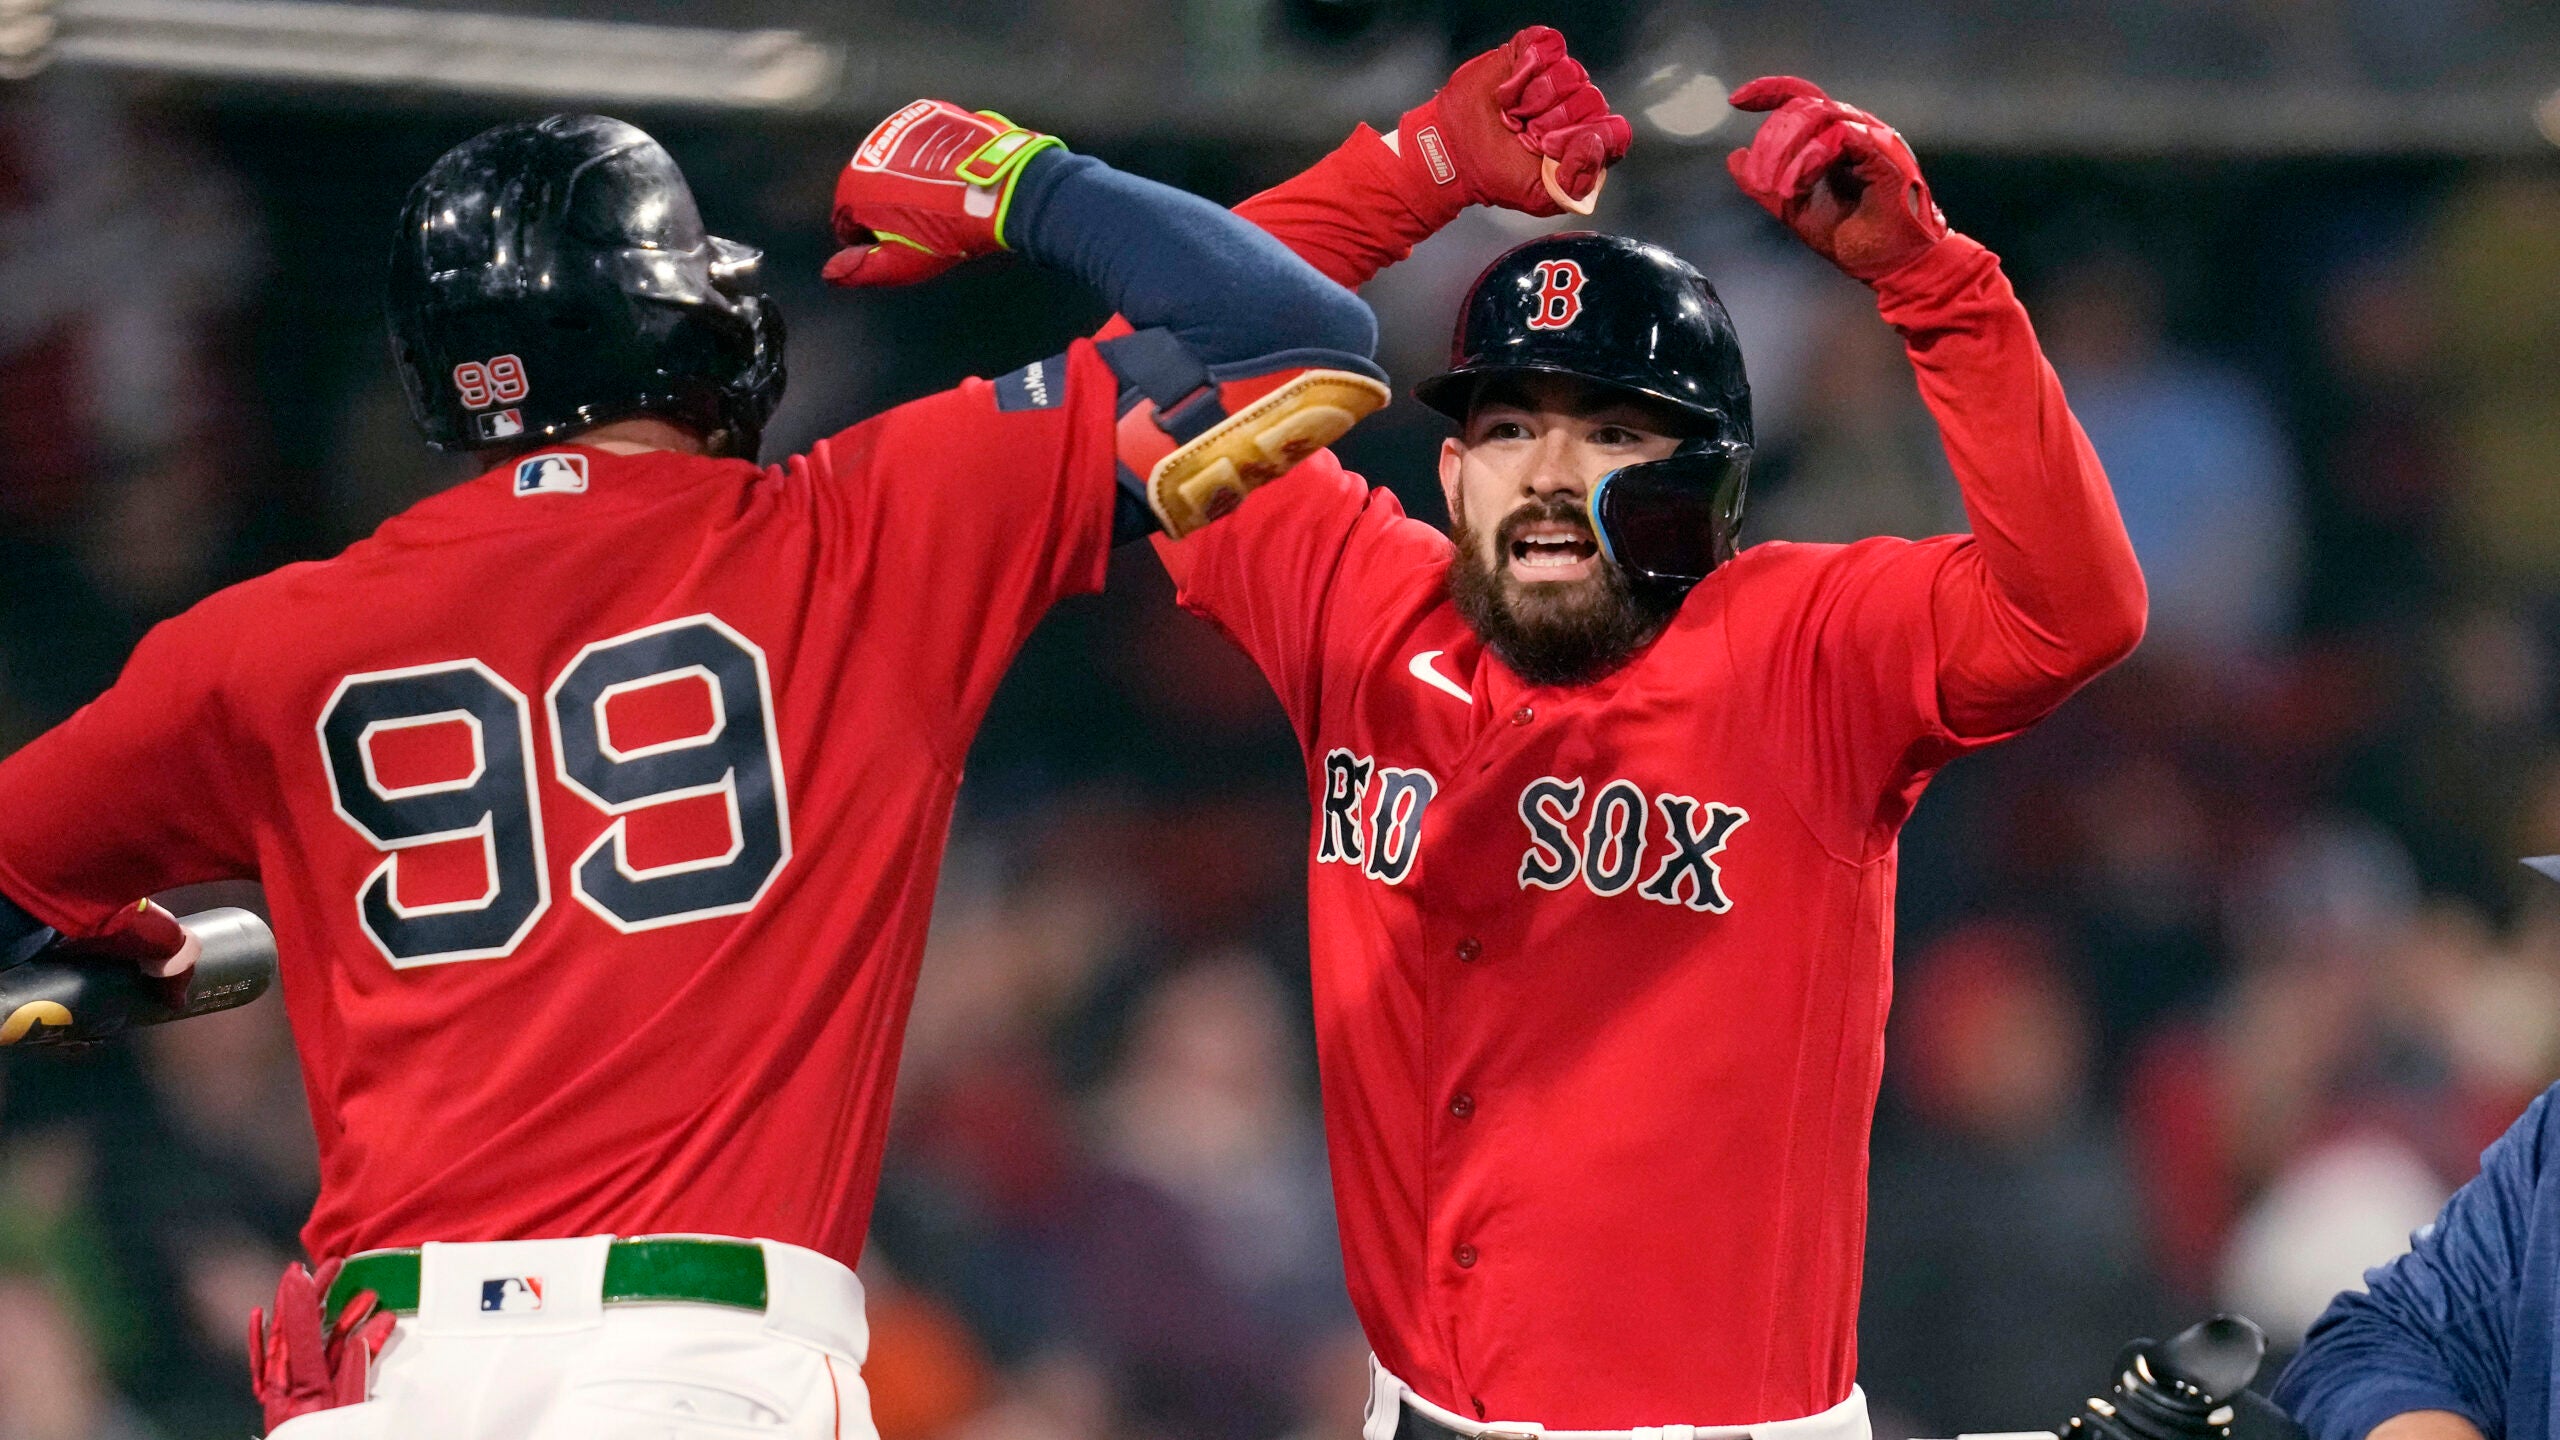 Boston Red Sox (@redsox) • Instagram photos and videos